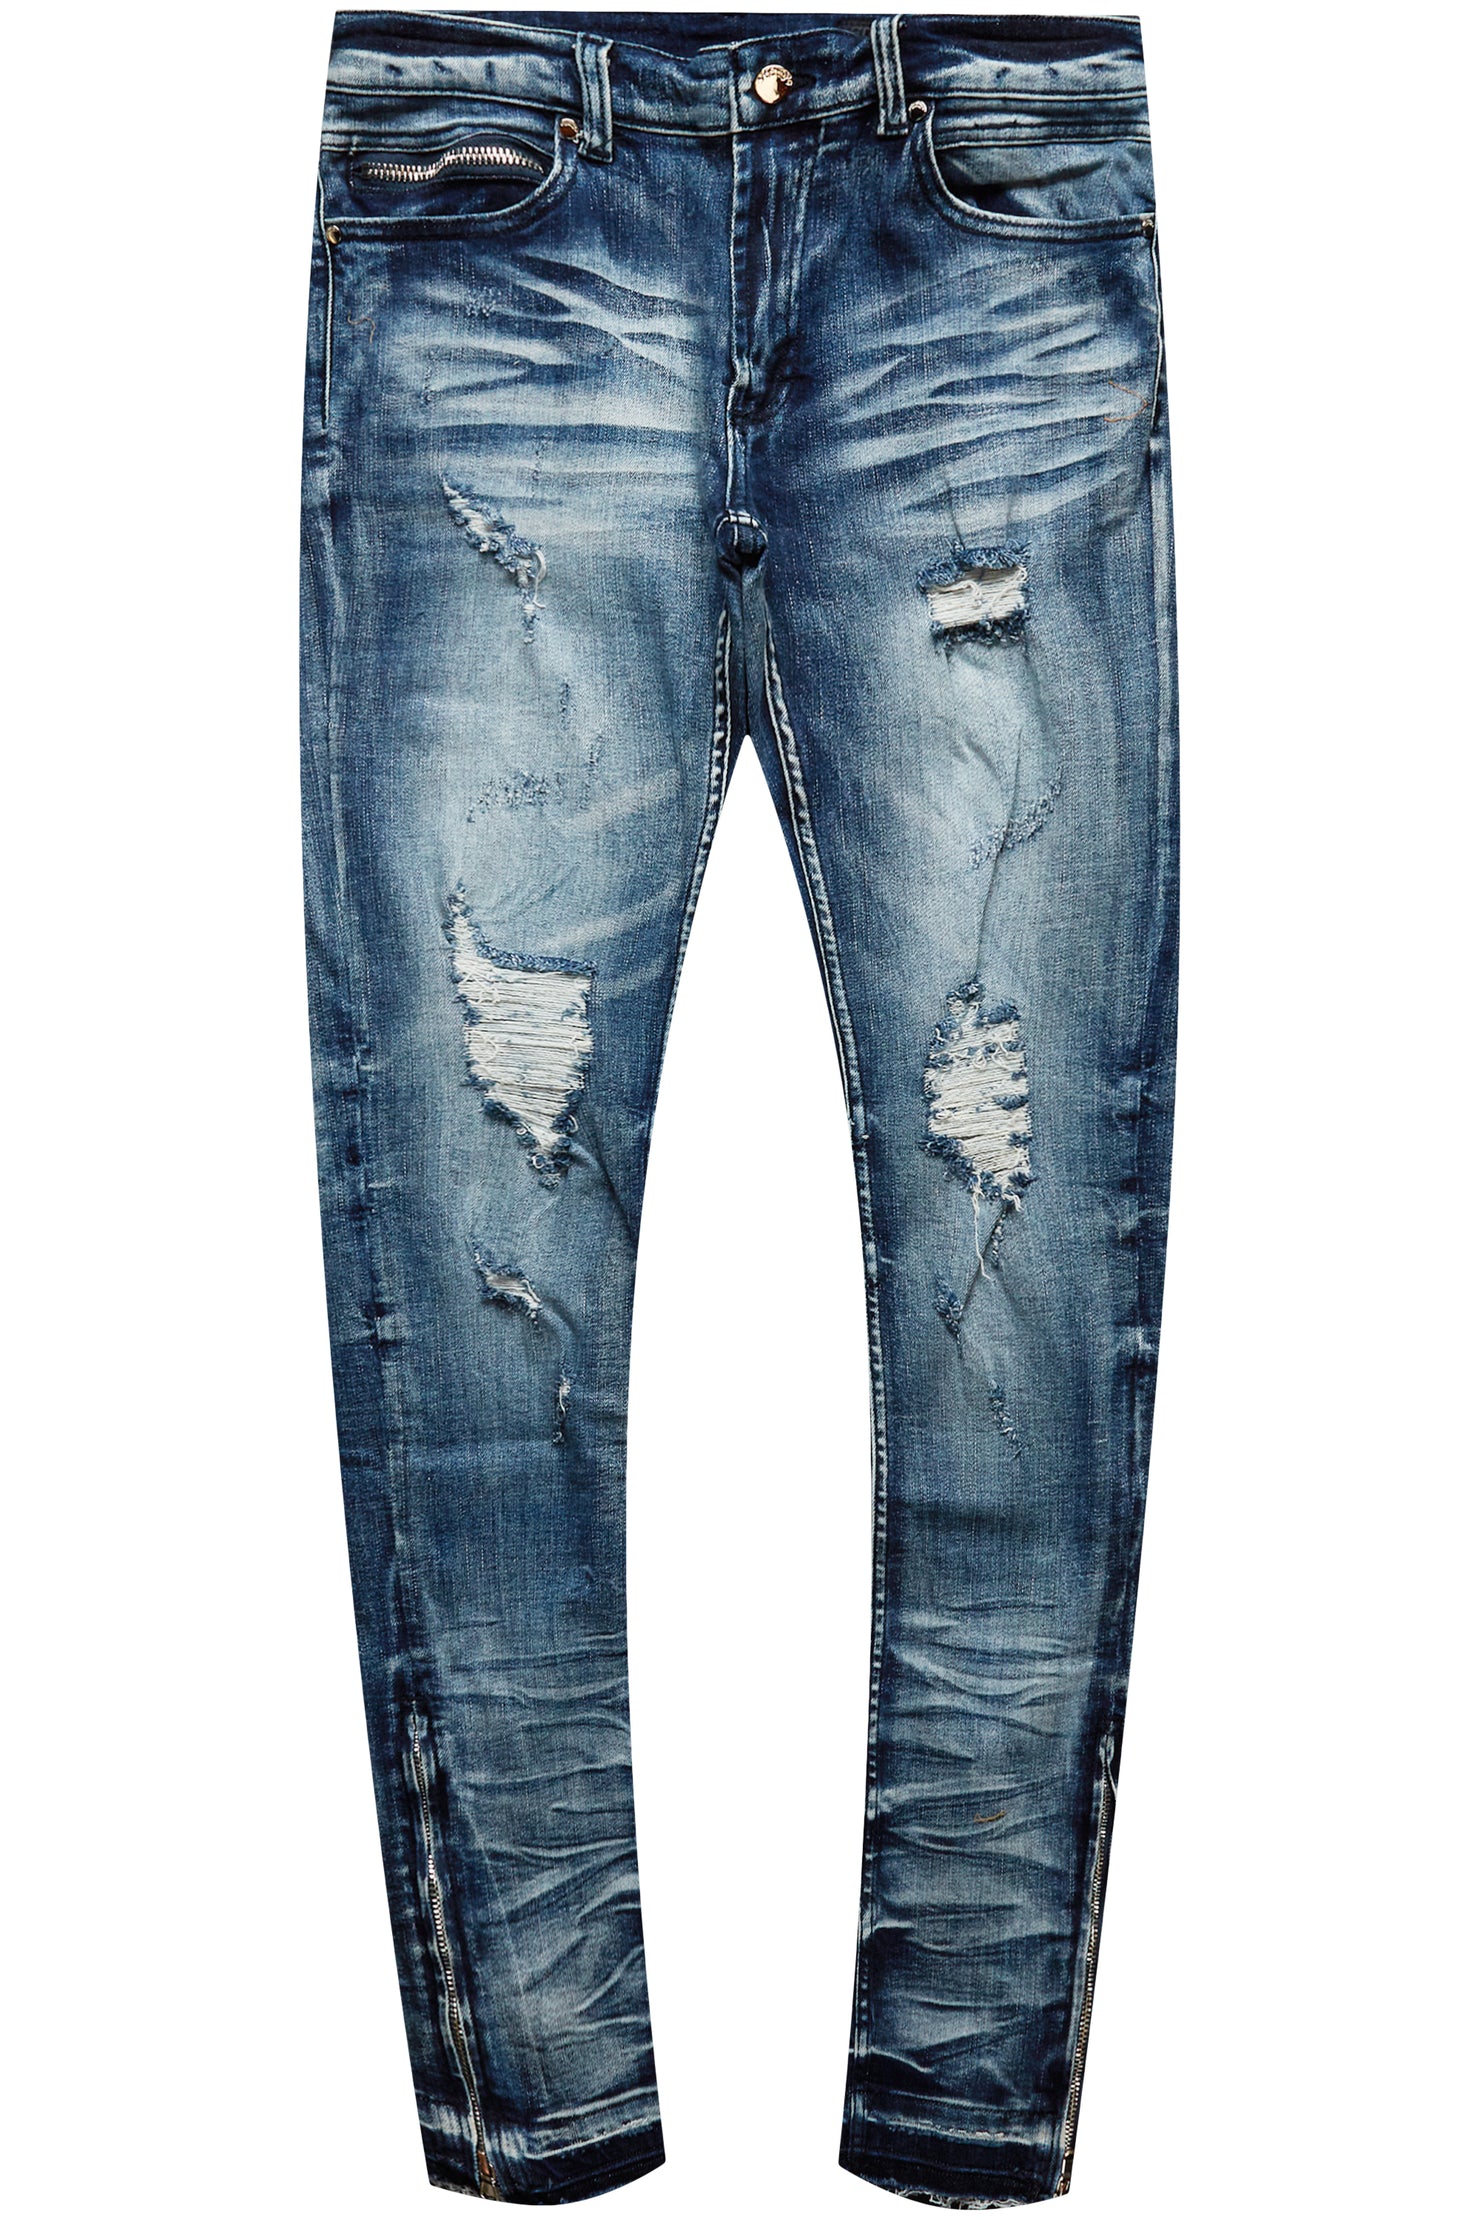 Jaymes Stacked Flare Jean-Blue